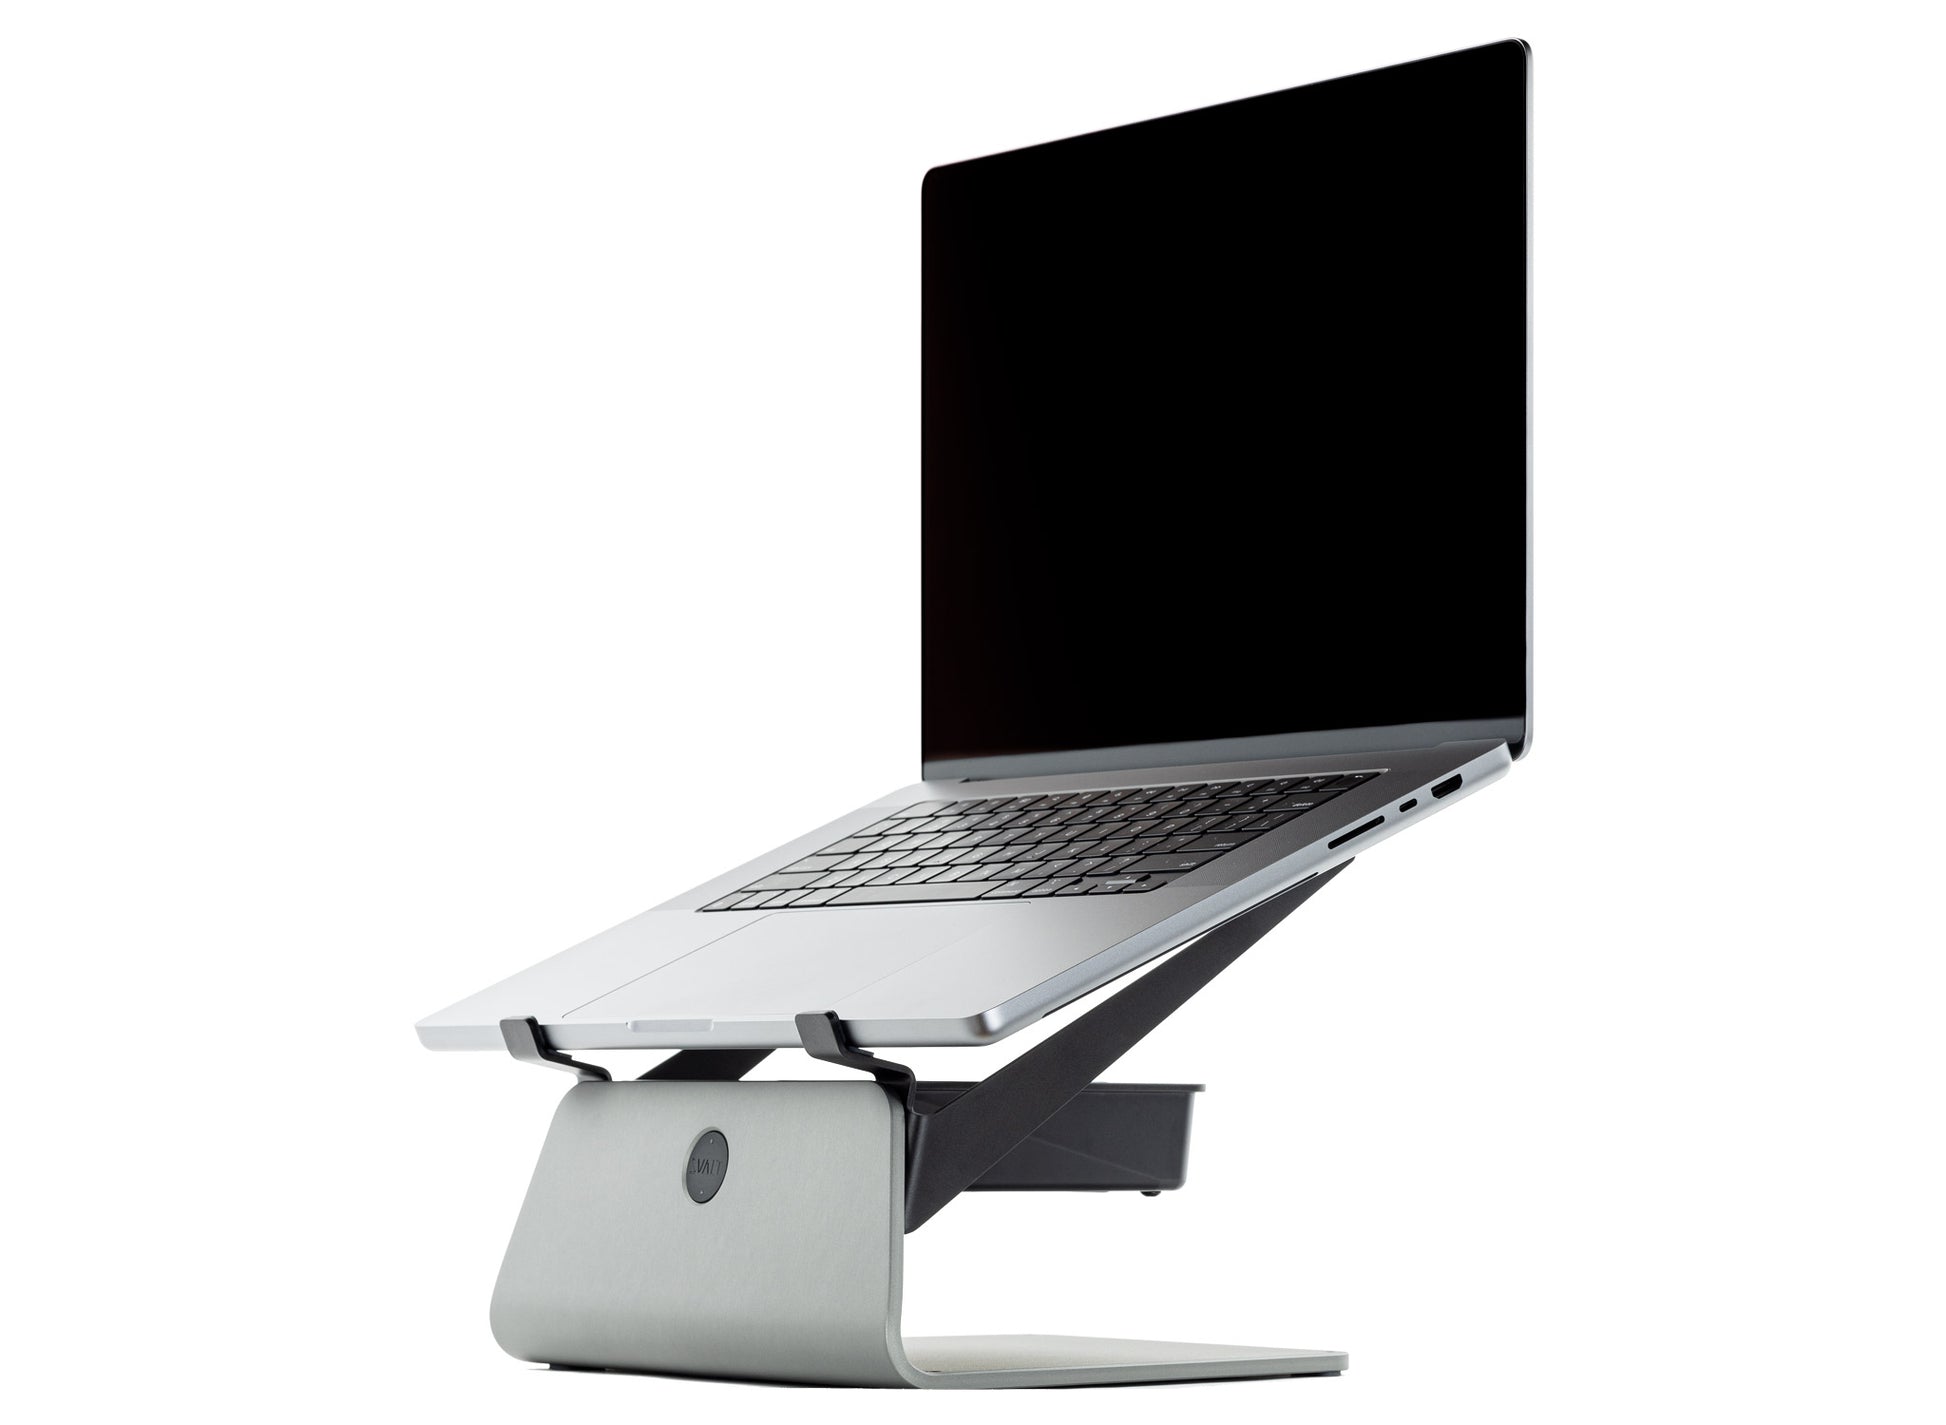 SVALT Cooling Stand model SxB14 gray front side view for quiet fan cooling performance with Apple laptop 16-inch MacBook Pro M1 Max